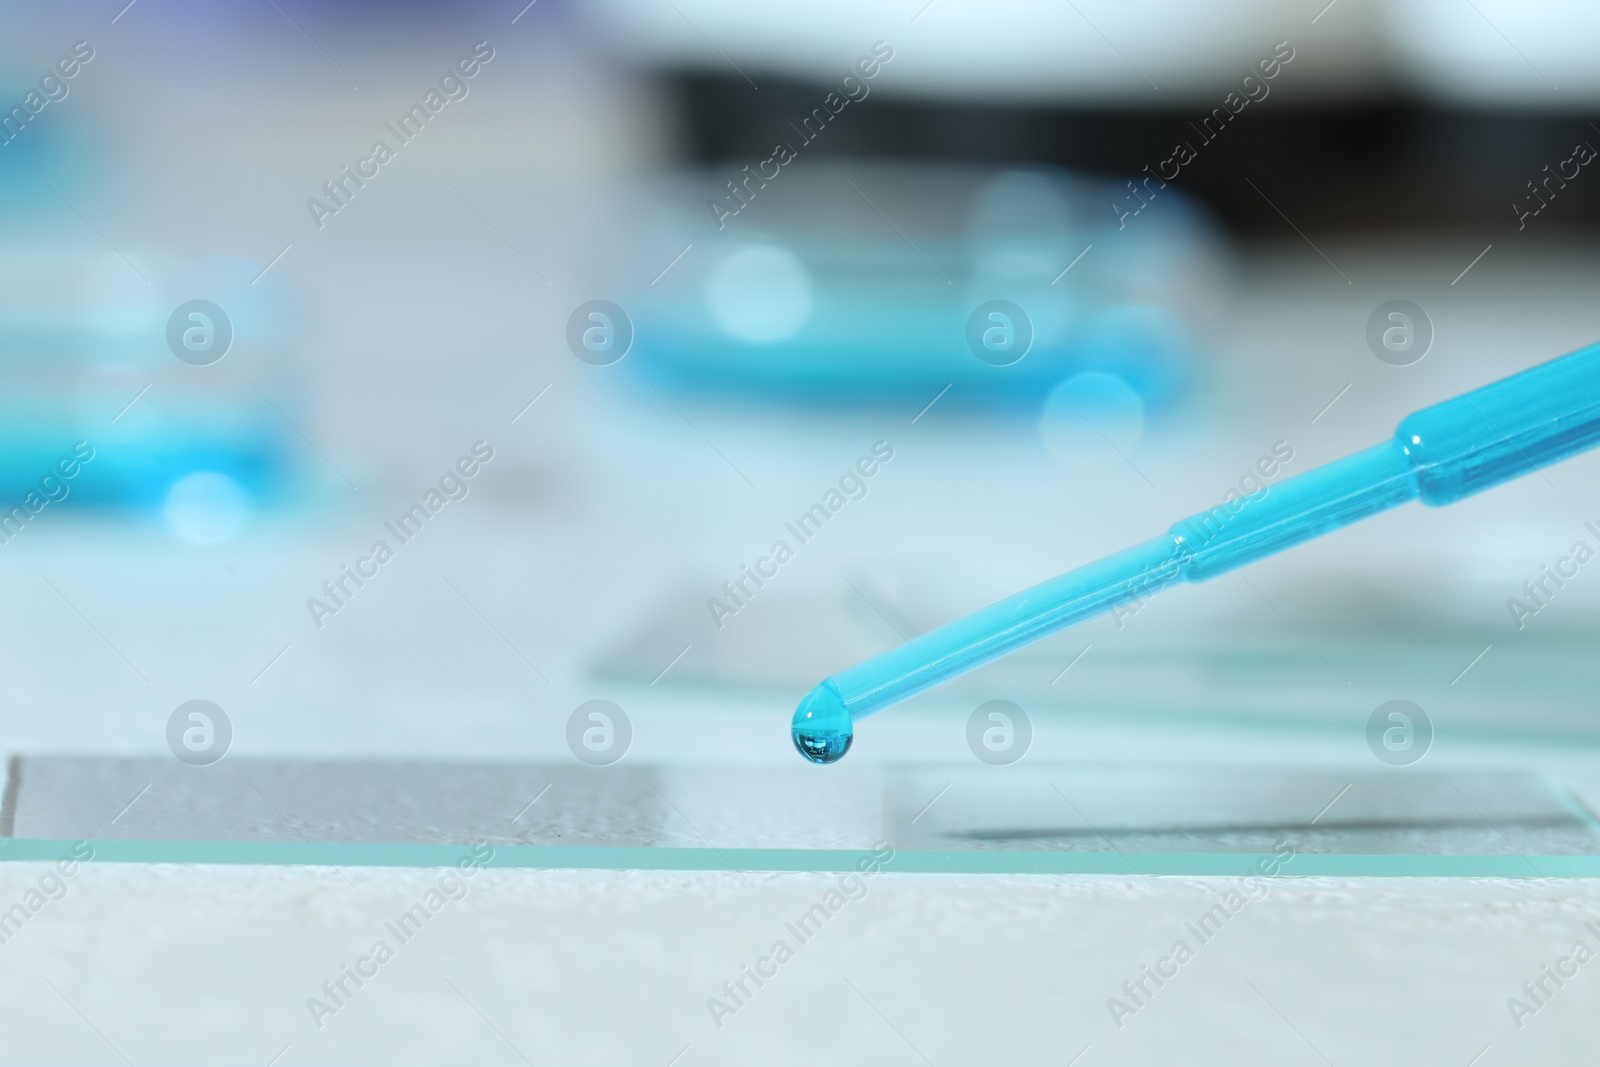 Photo of Dripping sample of light blue liquid onto microscope slide on white table, closeup